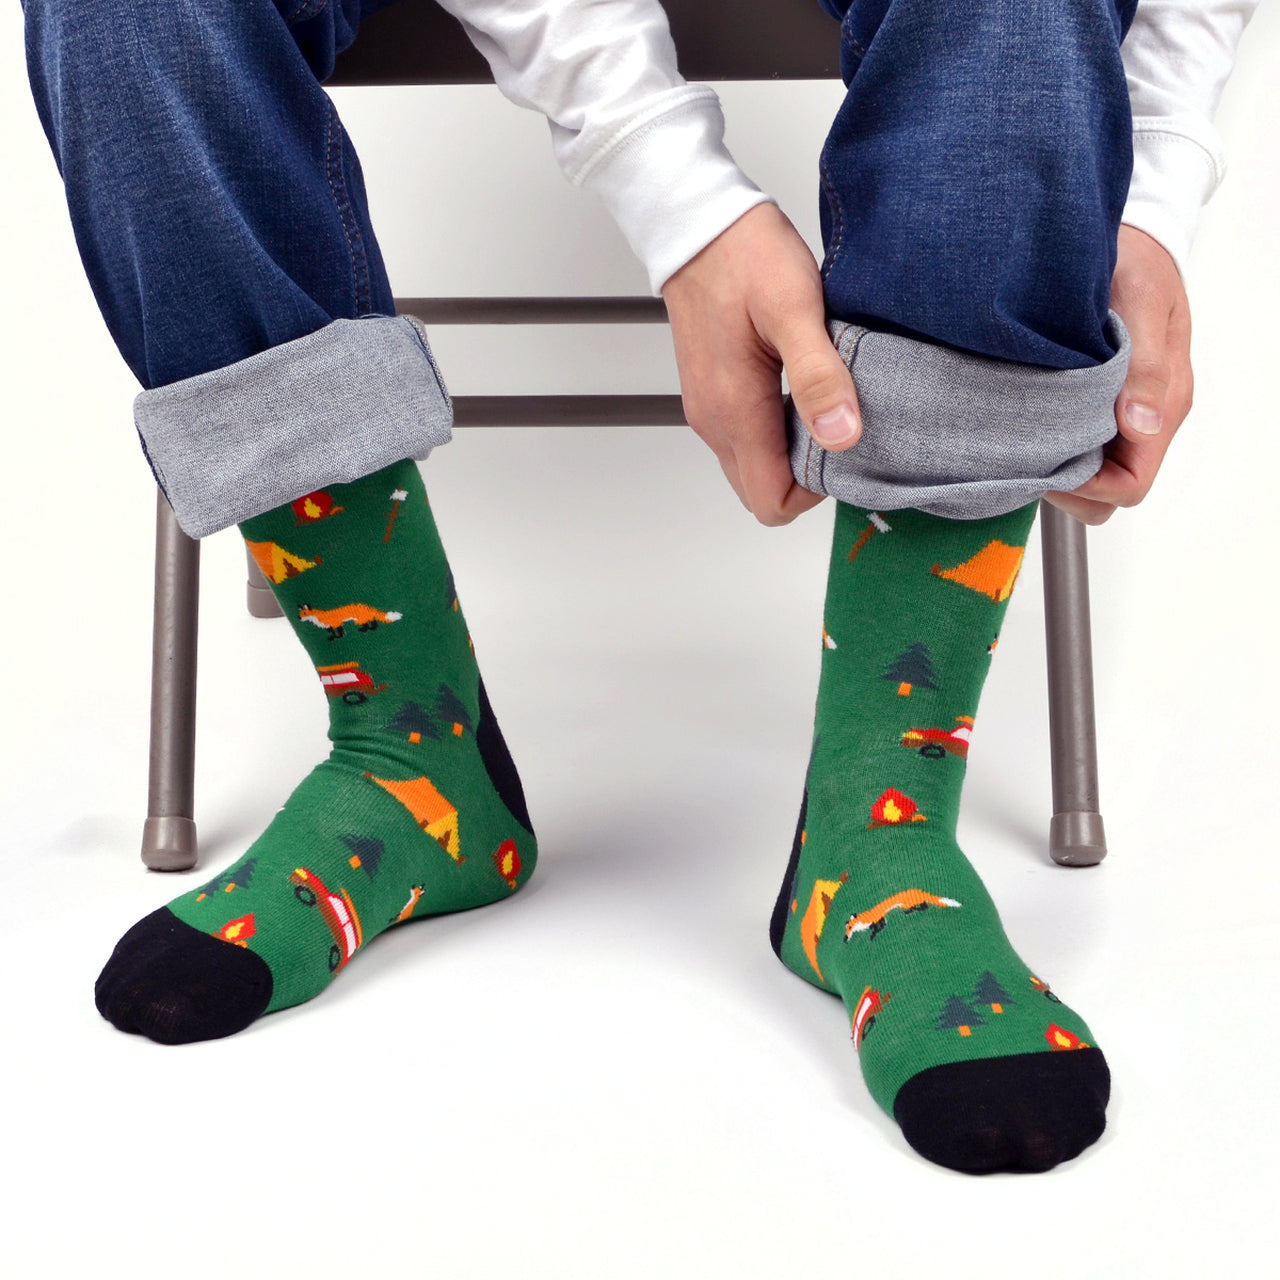 Fun Socks Men's Camping Novelty Socks Green and Black For Camping Outdoors Hiking Lovers Everywhere Dad Gifts